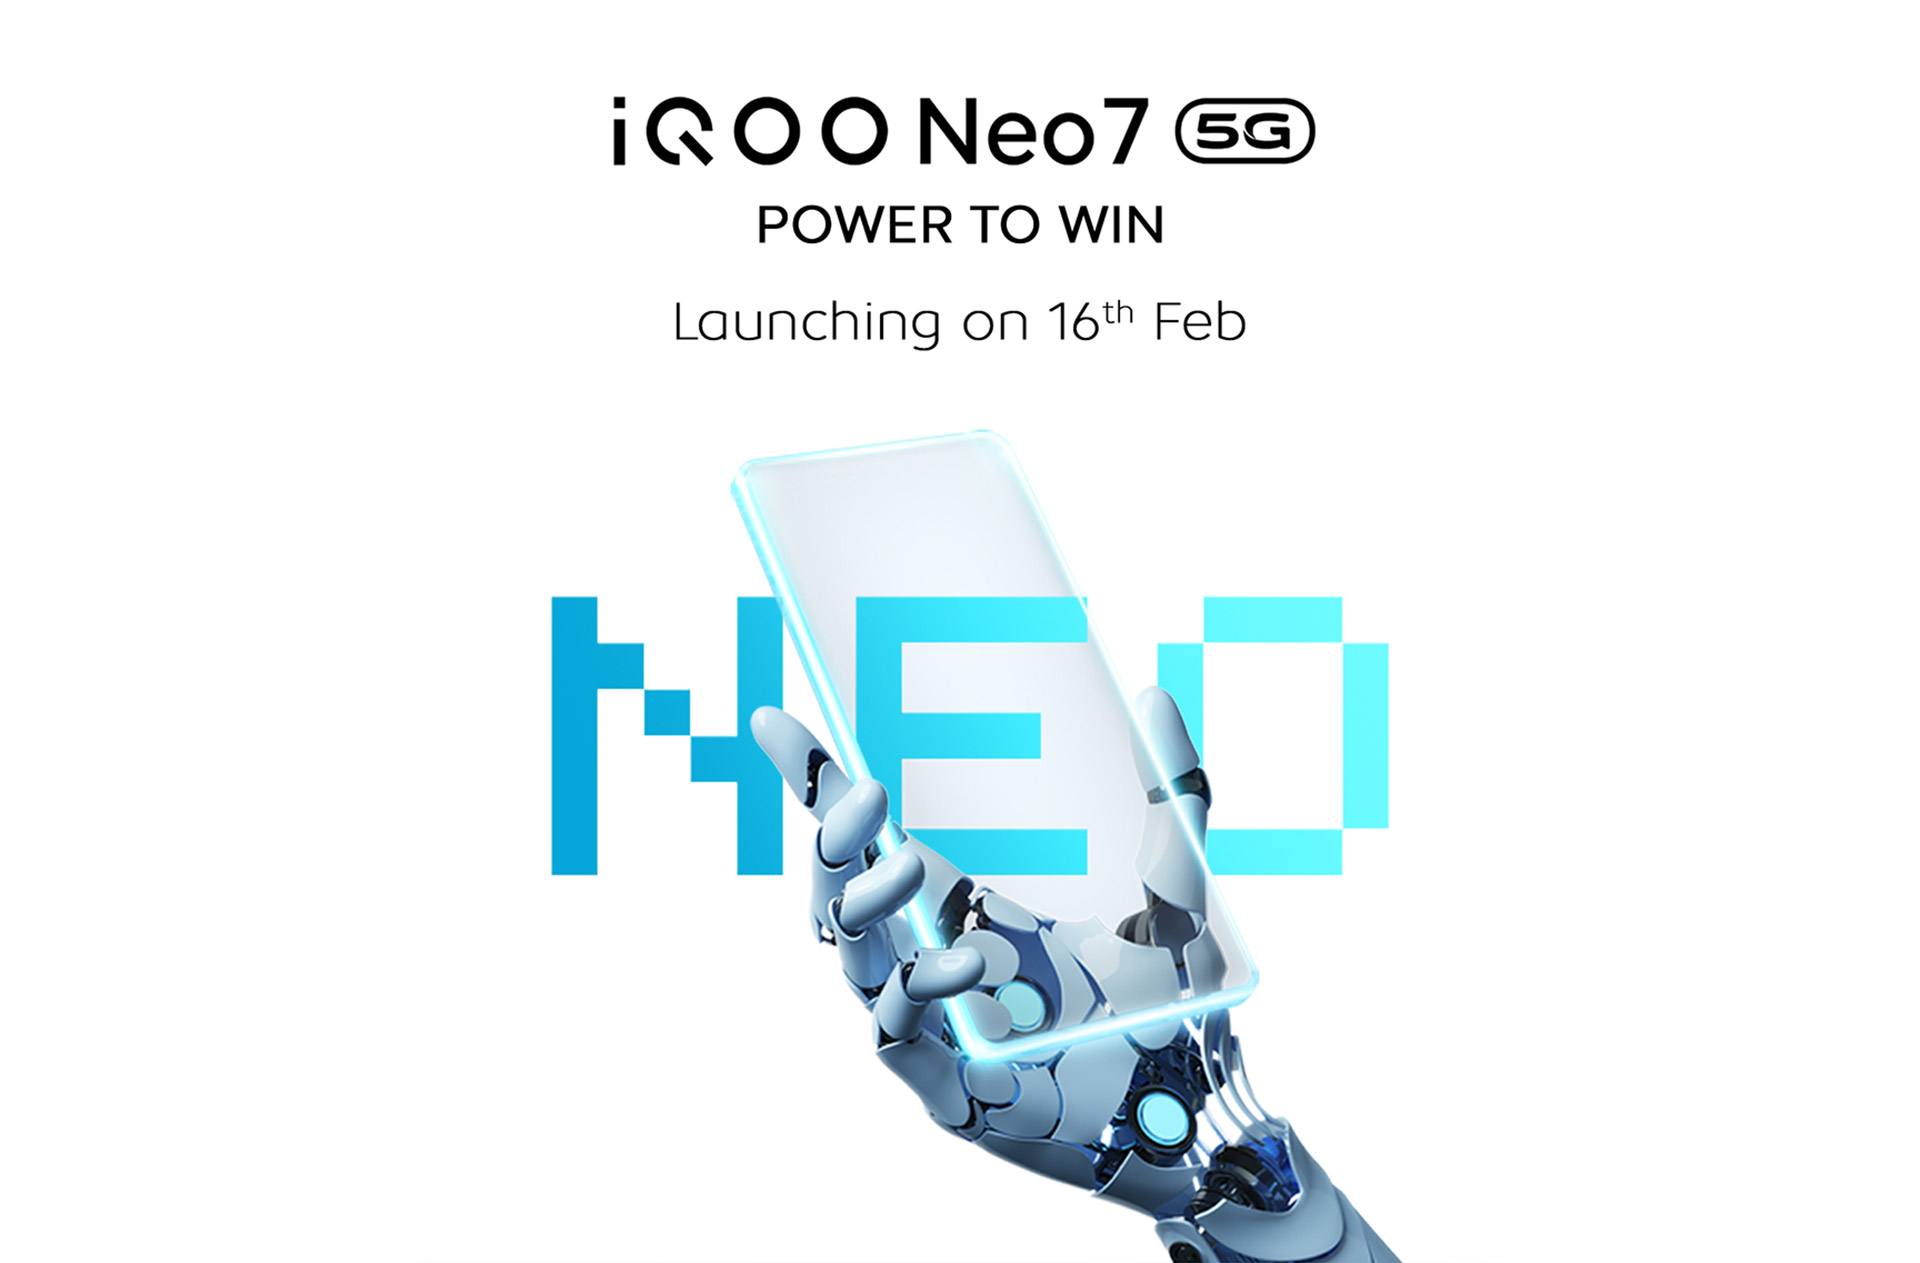 iQOO Neo 7 5G Specifications Confirmed Ahead Of February 16 Launch, Details Inside